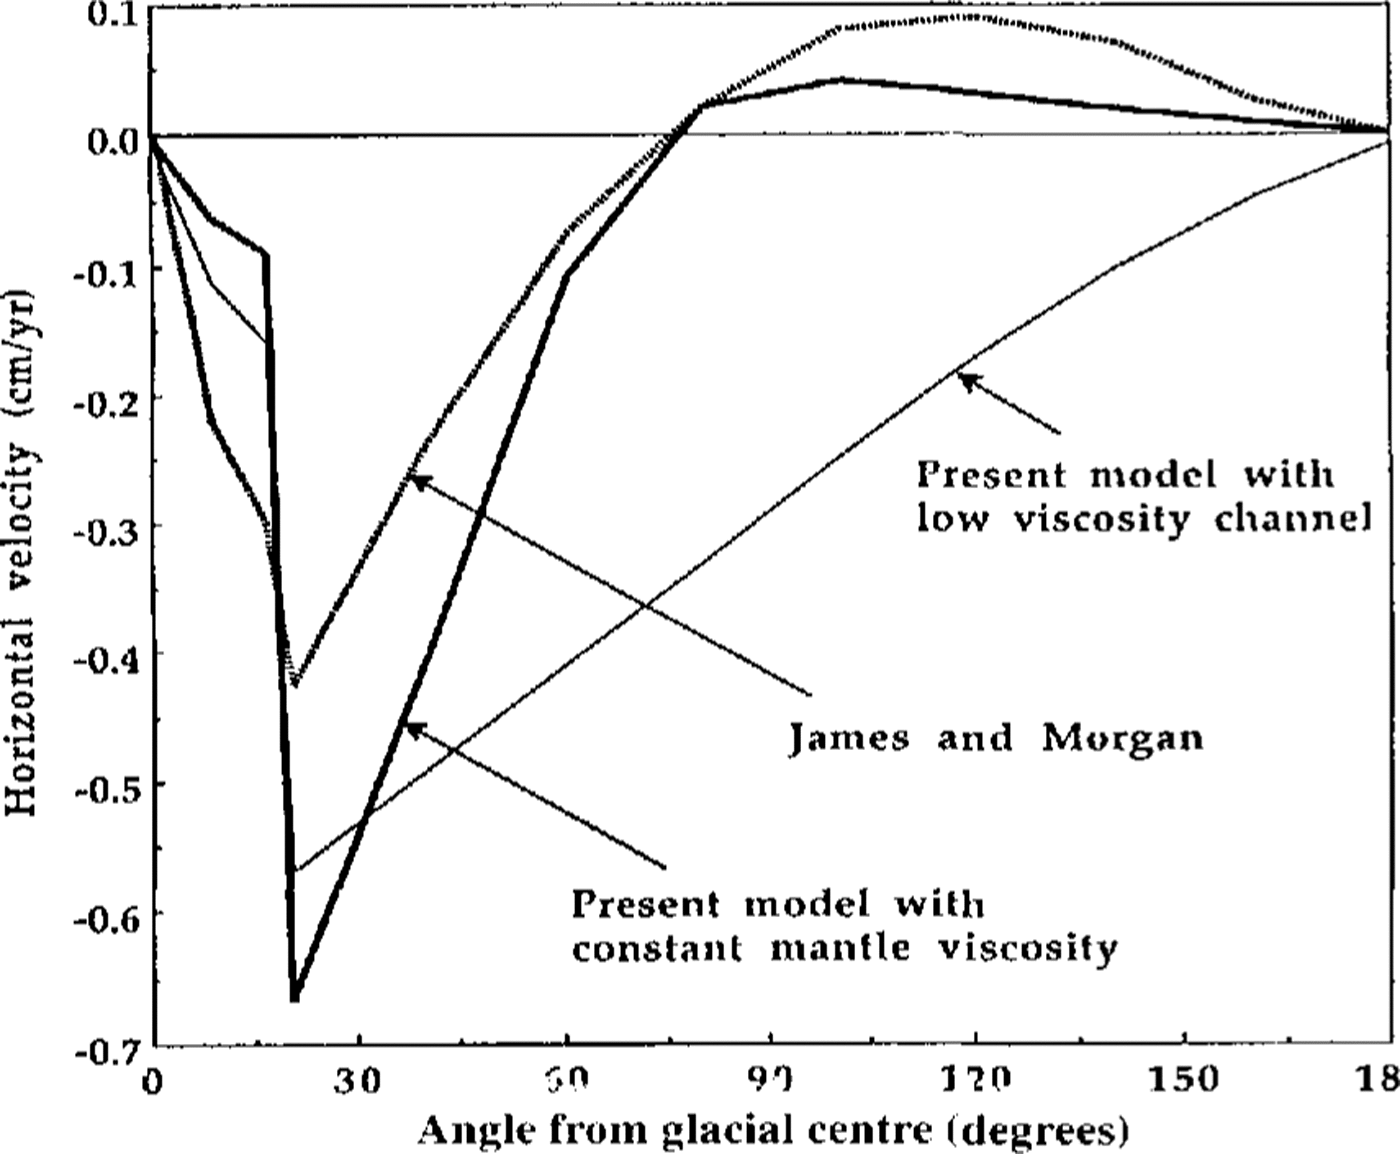 Ice sheets and continental drift, Annals of Glaciology